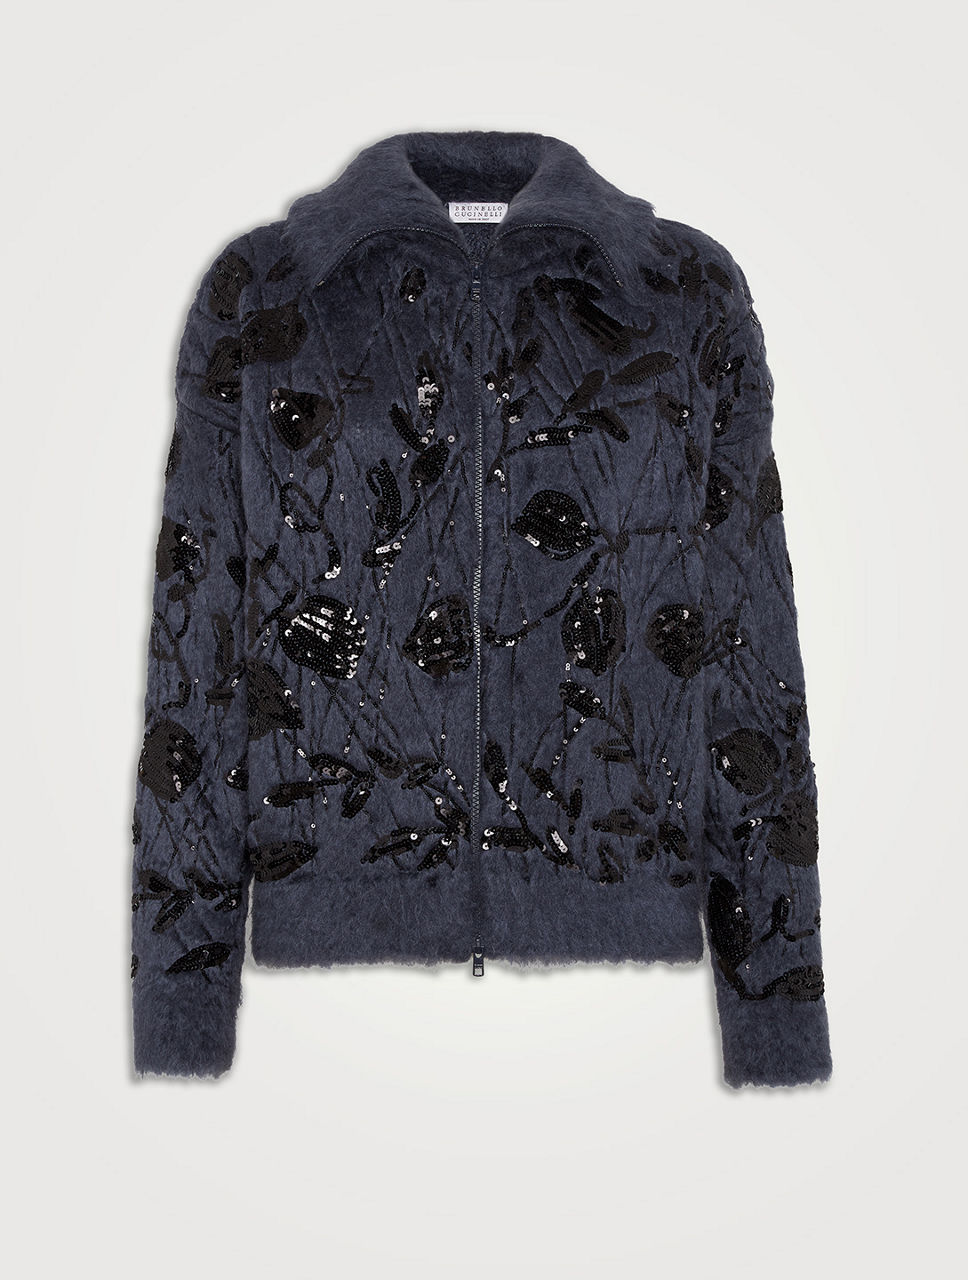 BRUNELLO CUCINELLI Mohair And Wool Cardigan With Embroidery | Holt